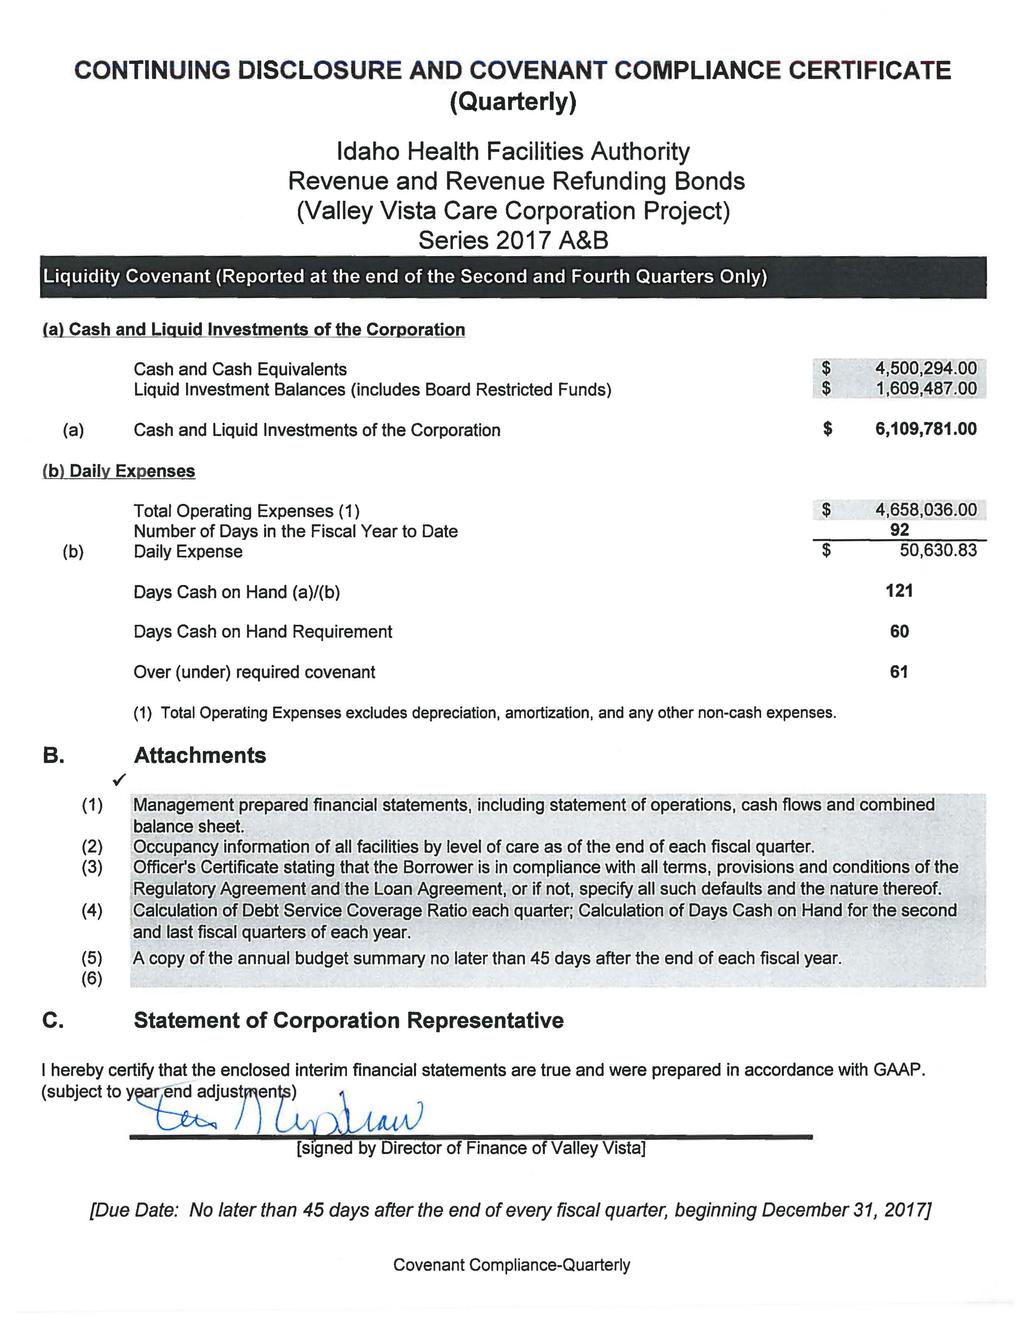 CONTINUING DISCLOSURE AND COVENANT COMPLIANCE CERTIFICATE (Quarterly) Idaho Health Facilities Authority Revenue and Revenue Refunding Bonds (Valley Vista Care Corporation Project) Series 207 A&B